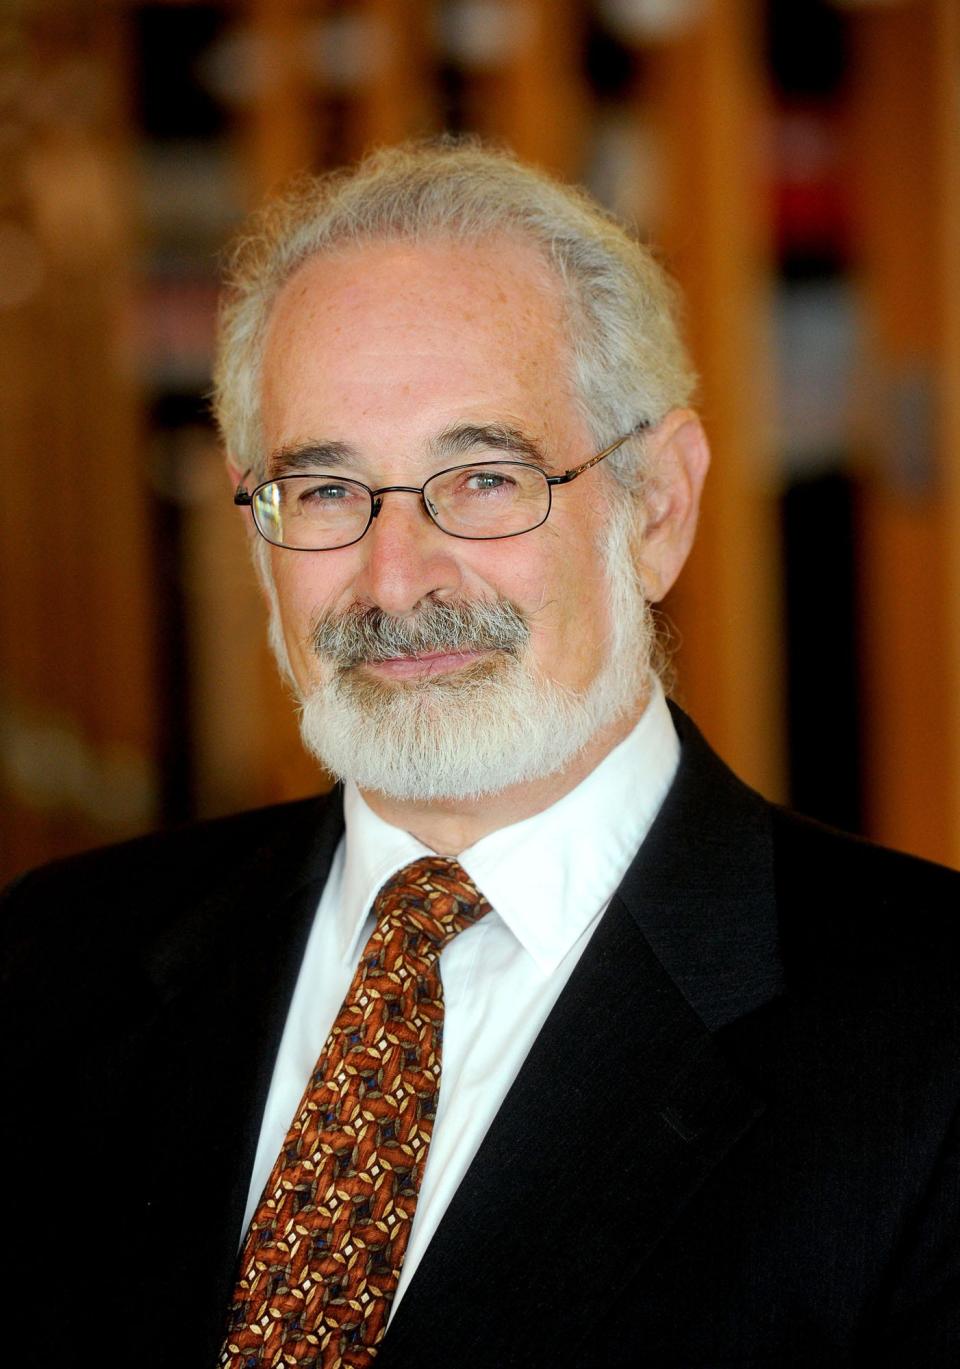 Stanton Glantz is a professor of medicine and director of the Center for Tobacco Research Control & Education at the University of California, San Francisco.